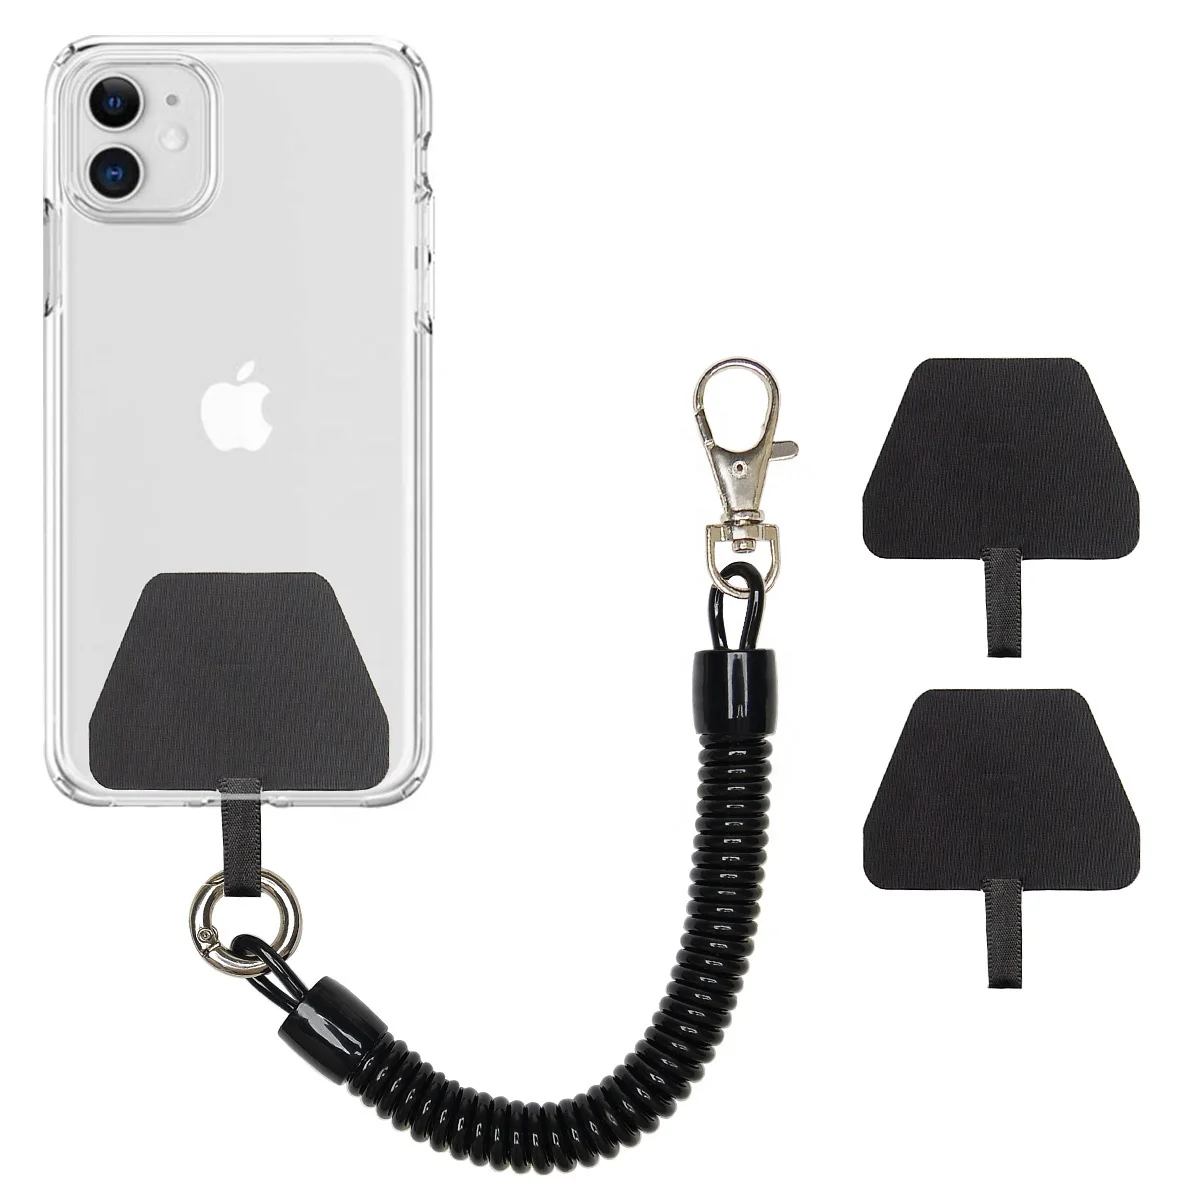 5pack Finger Ring Short Lanyard Ideal for iPhone Cell Phone Smartphone Phone Case Camera Key Any Electronic Devices with a Lanyard Hole Black 5pcs